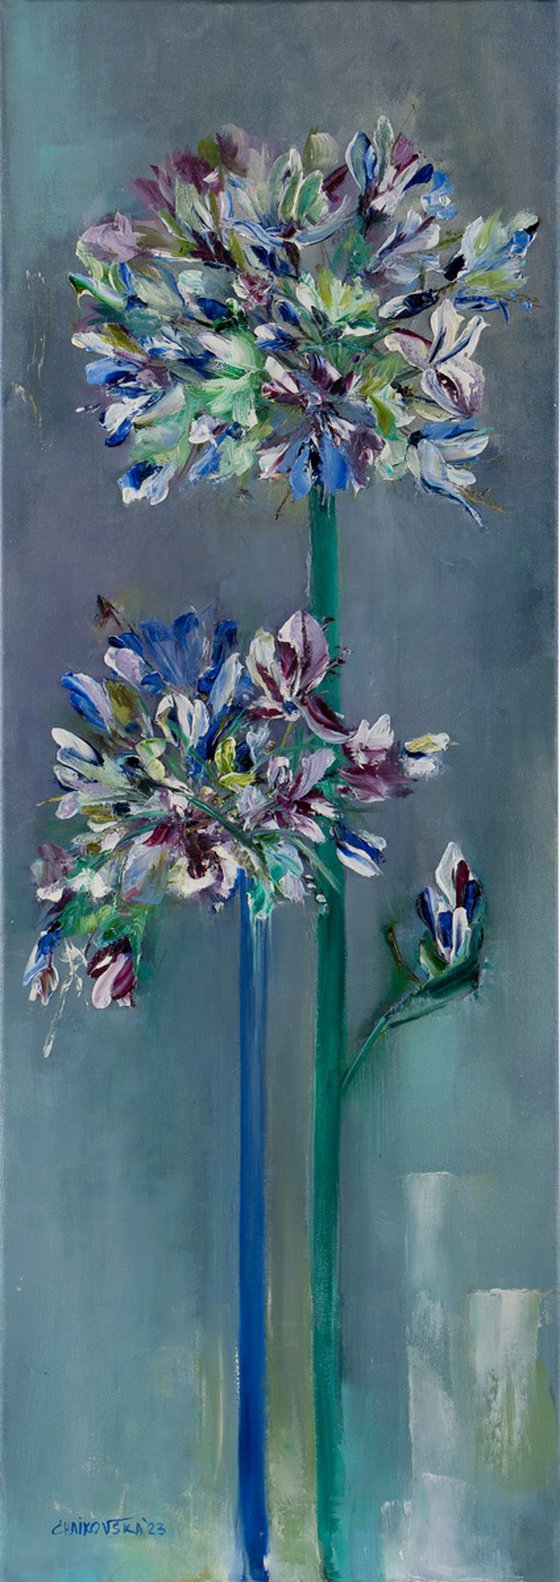 AGAPANTHUS, Oil on canvas panel